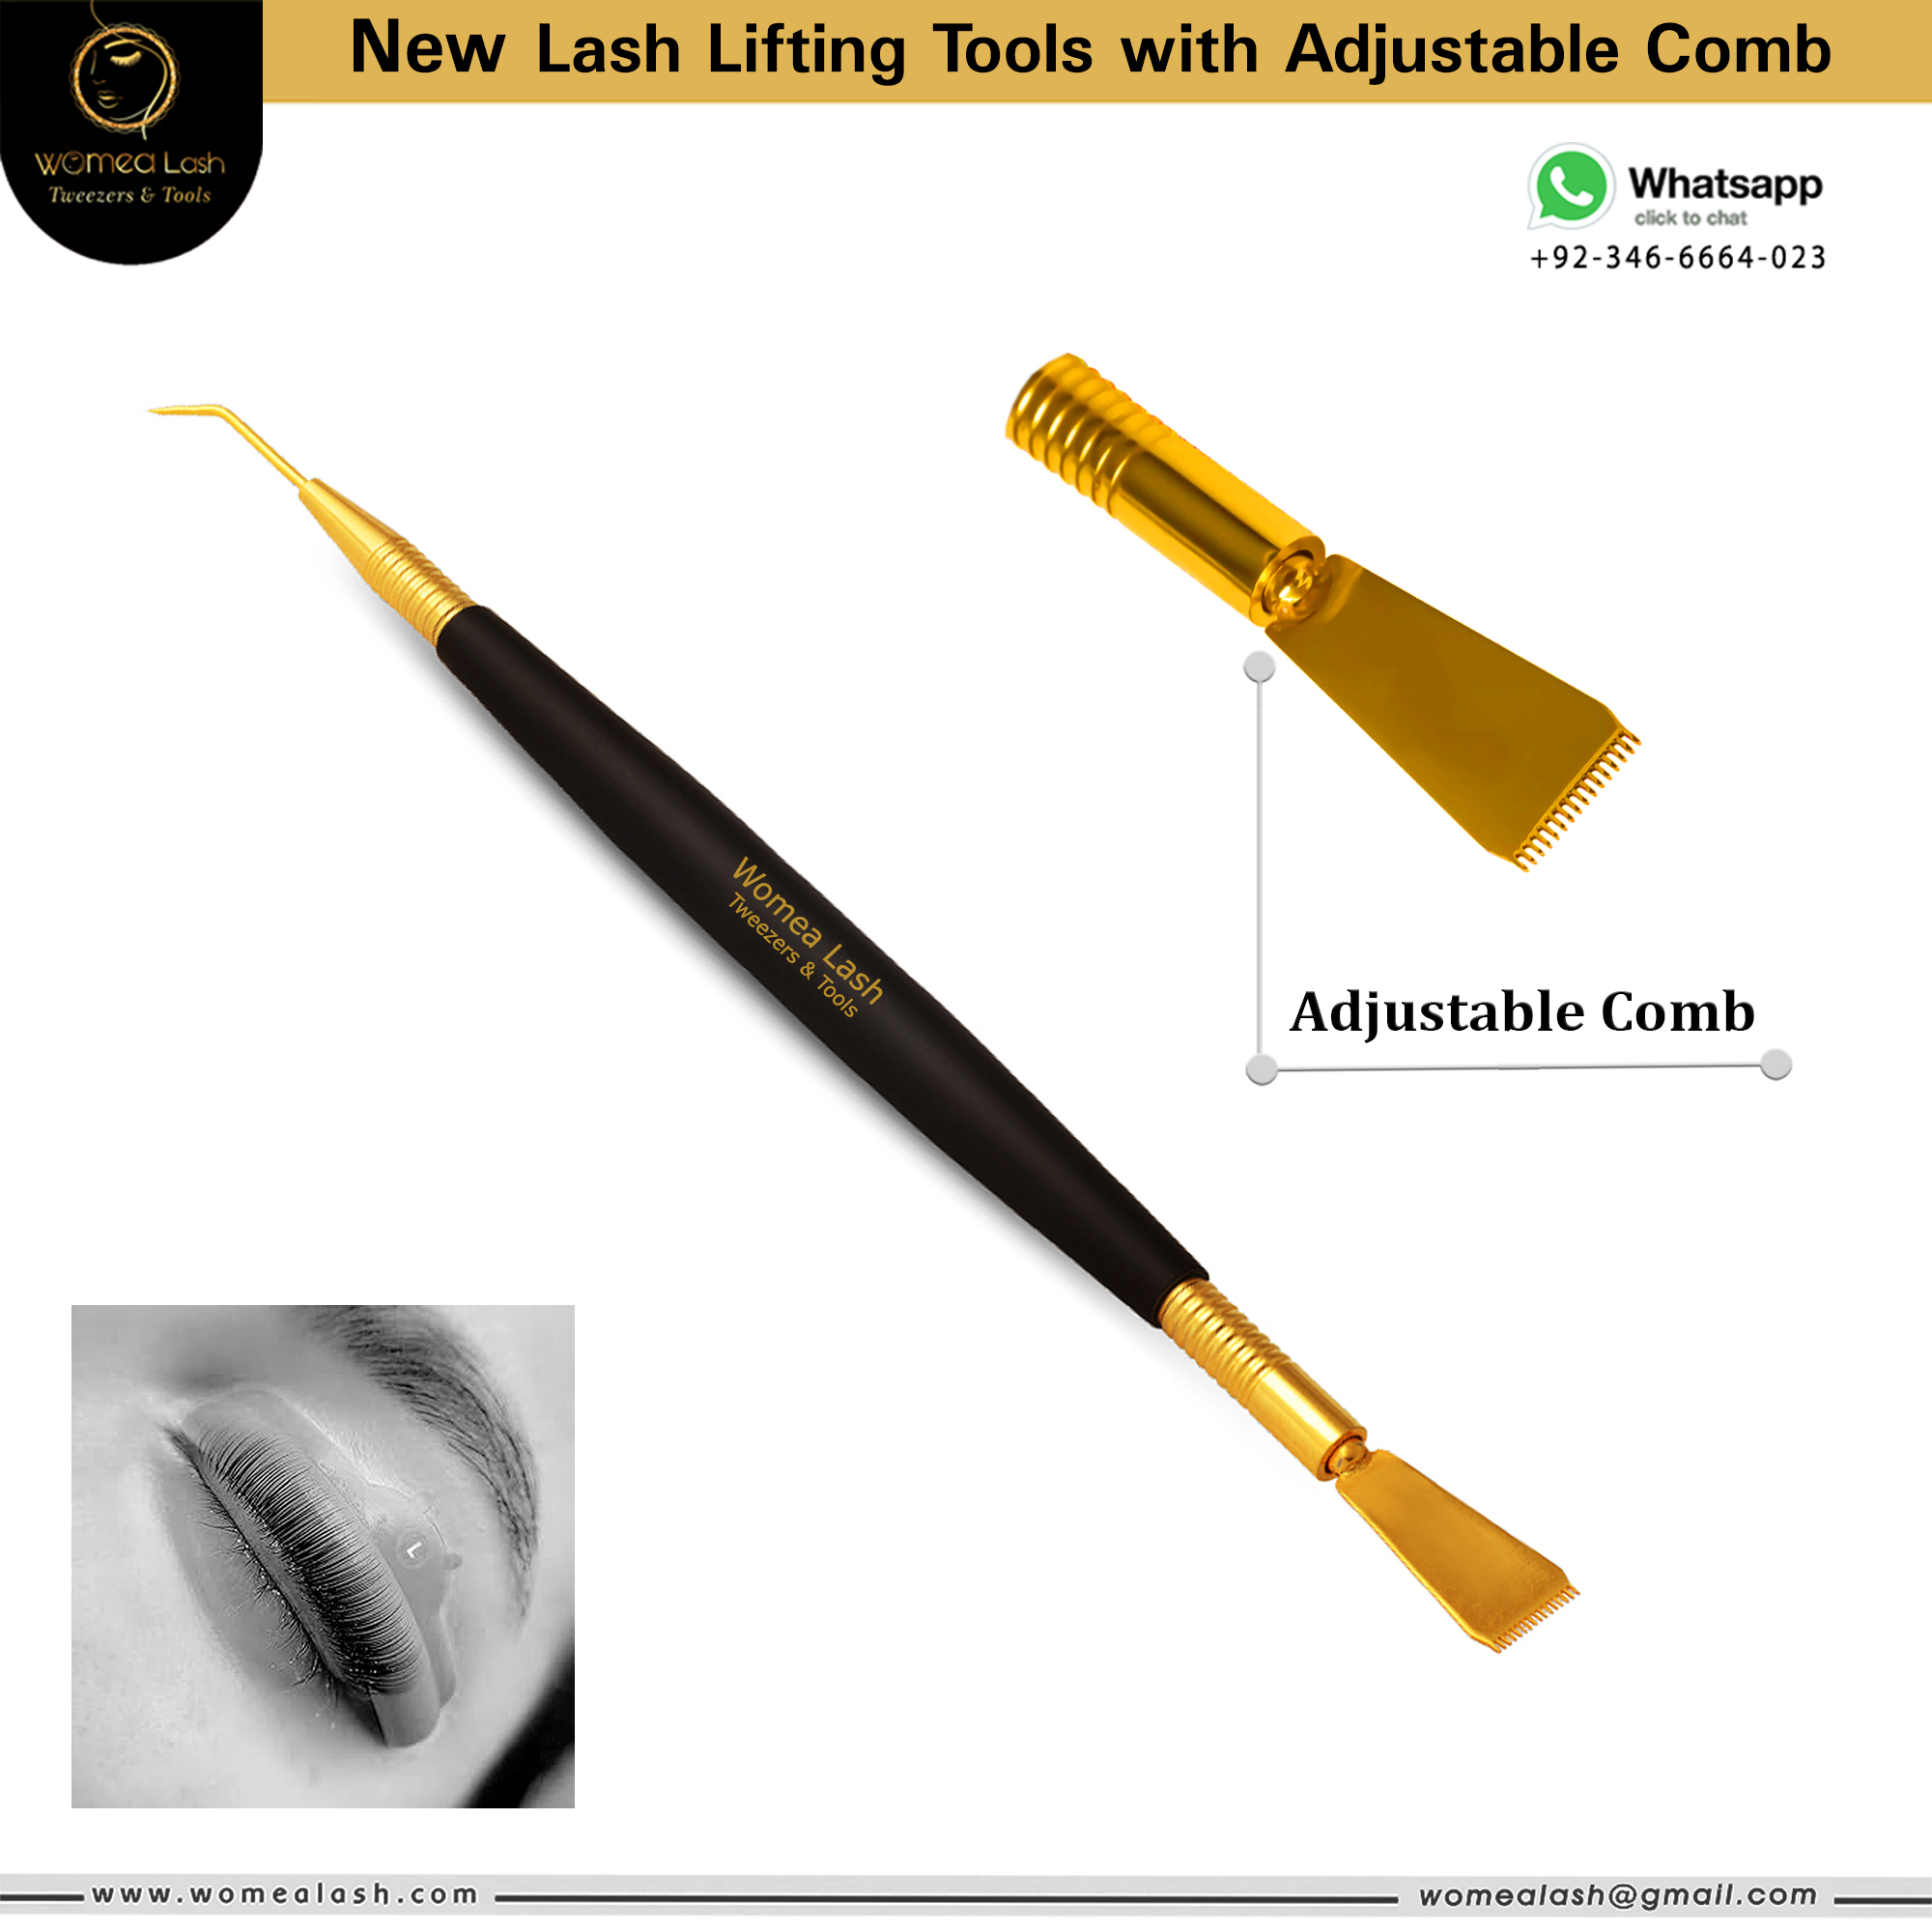 Selling New Lash Lifting Tool with Adjustable Comb in Black & Gold Color in Stainless Steel Material 